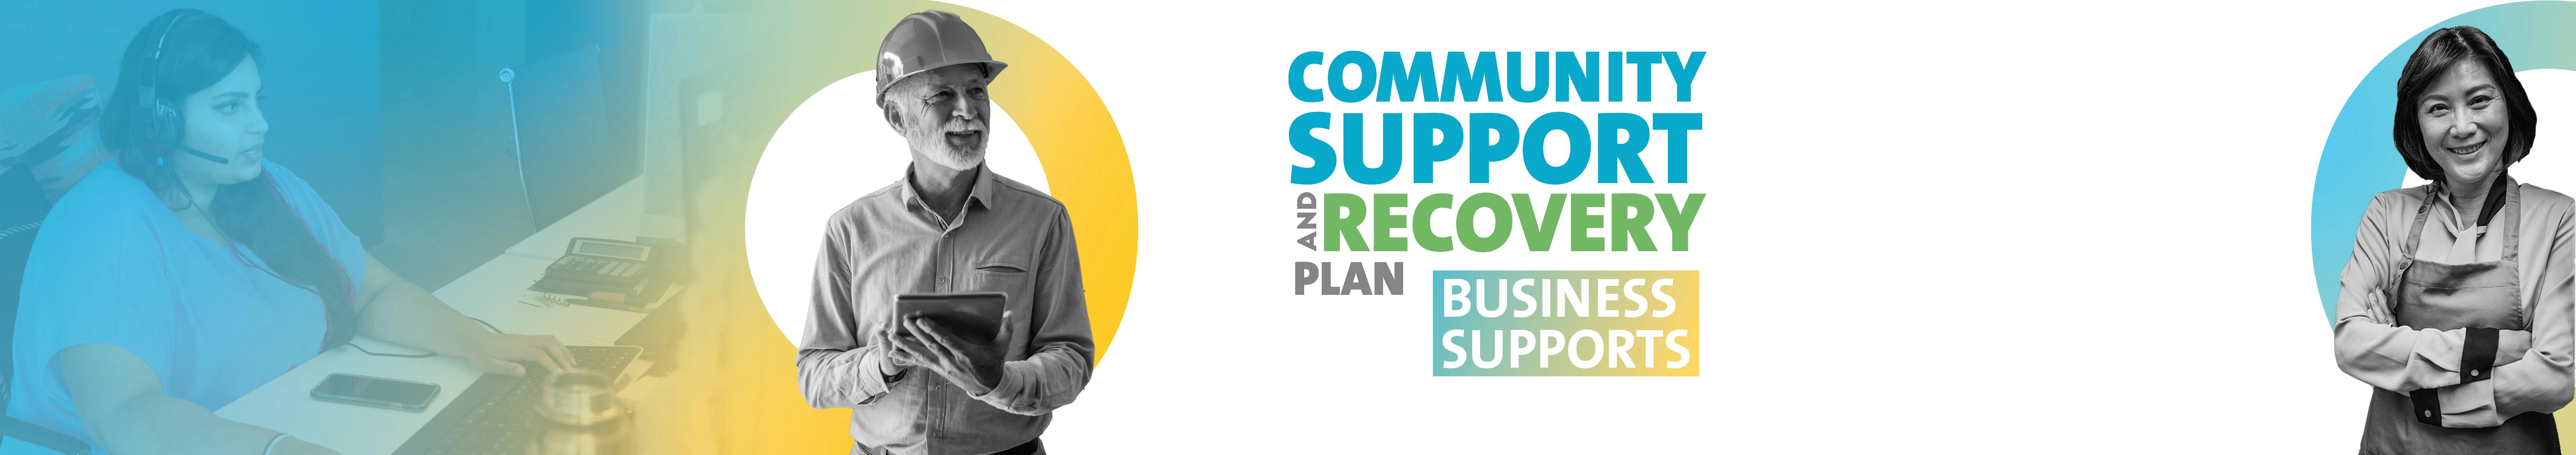 Community Support and Recovery Plan - Business Supports